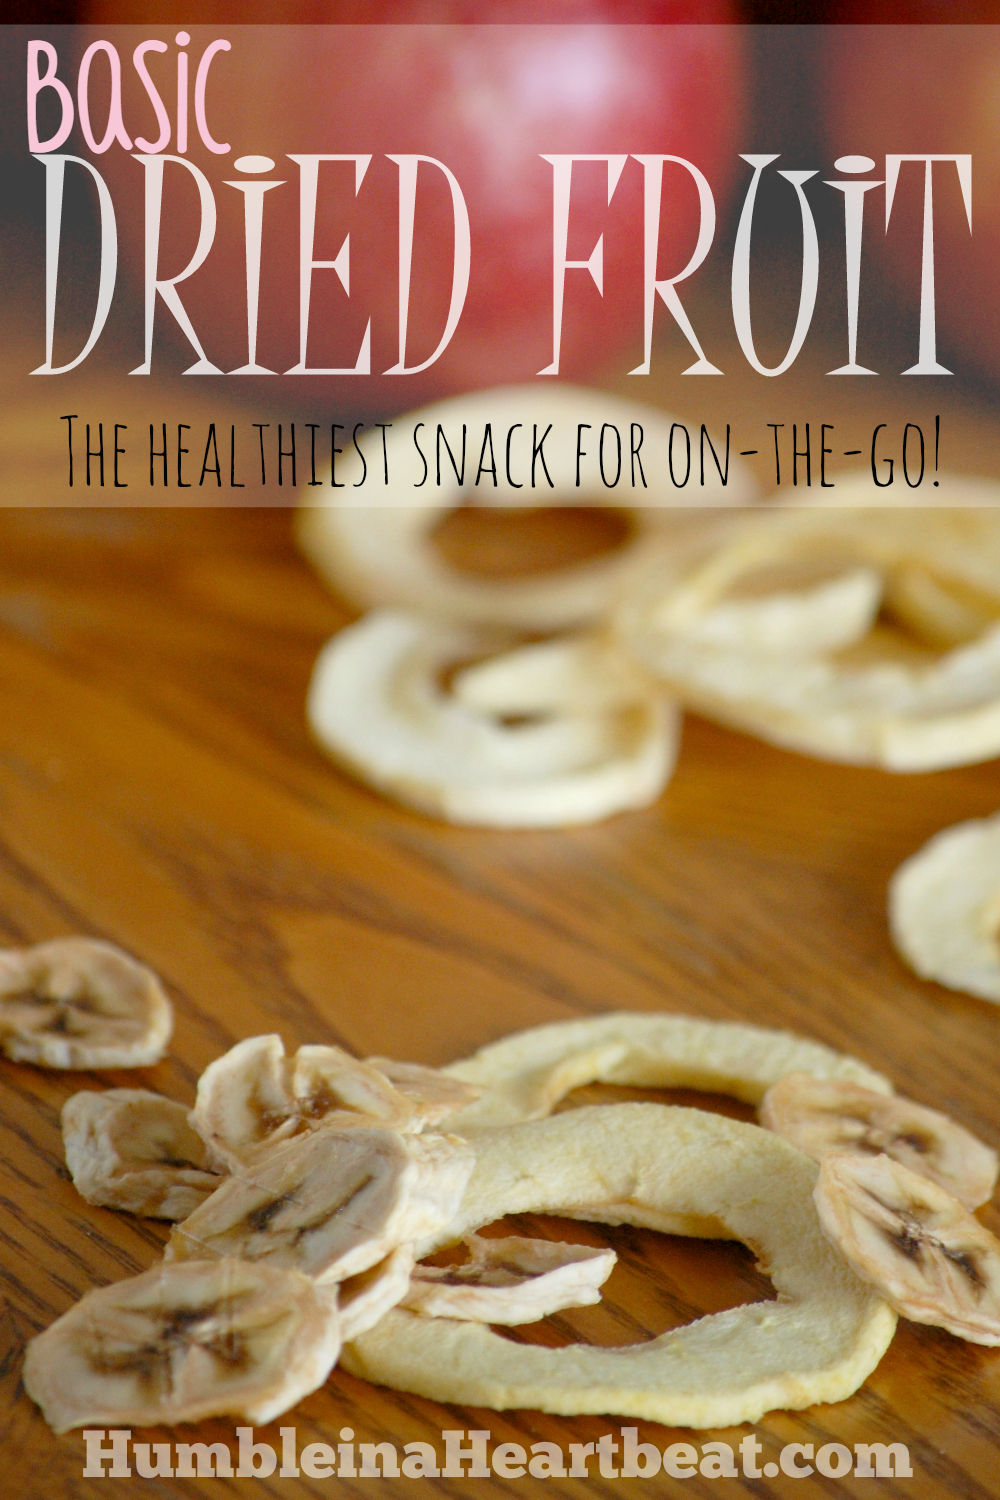 Looking for a healthy on-the-go snack that both you and your child will love? Try making some basic dried fruit!